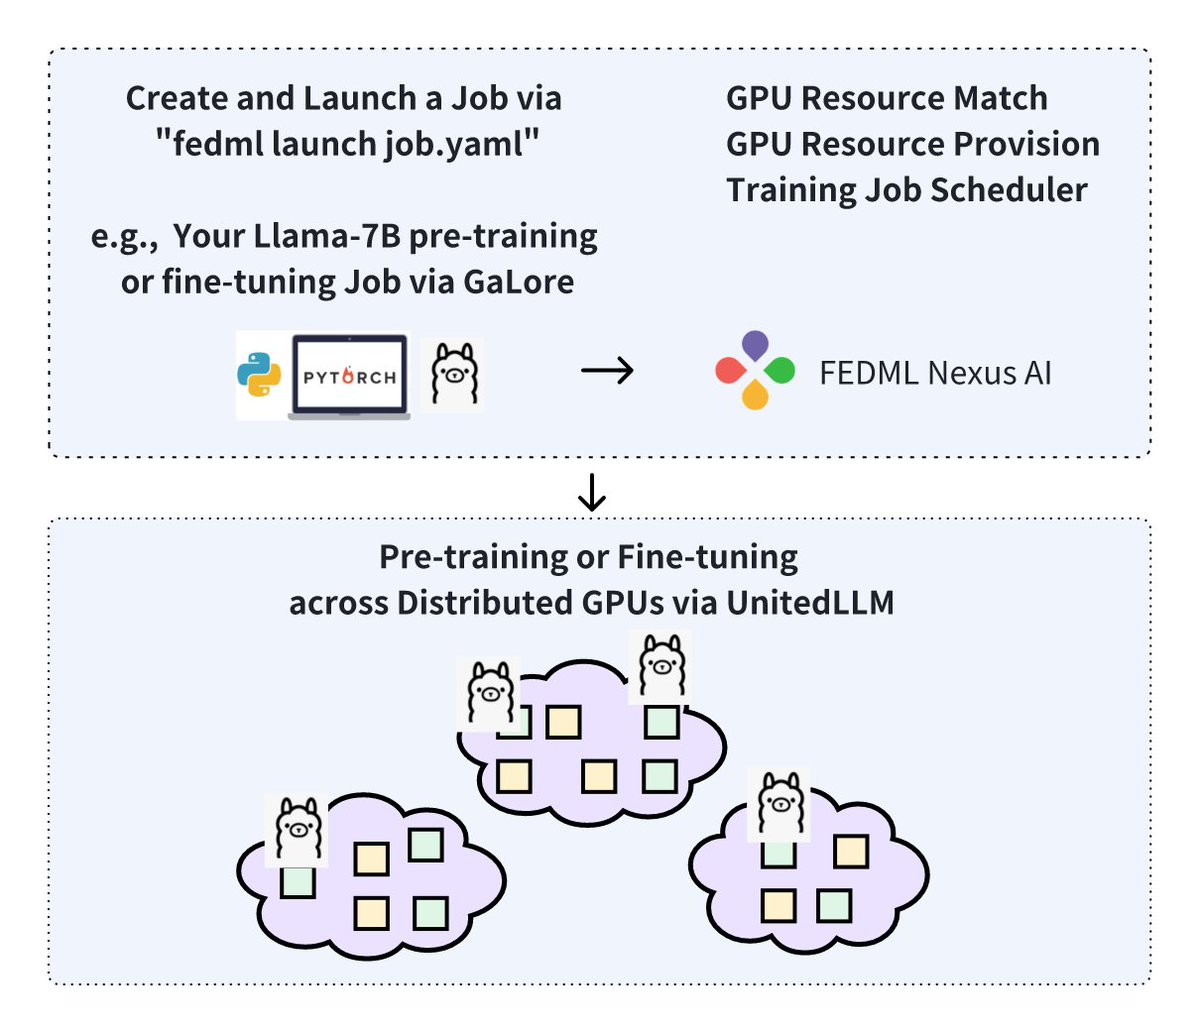 LinkedIn / Twitter post:
🚀 Exciting News! 🚀#pretraining #finetuning #llm #GaLore #FEDML
🌟 FEDML Nexus AI platform now unlocks the pre-training and fine-tuning of LLaMA-7B on geo-distributed RTX4090s!

📈By supporting the newly developed GaLore as a ready-to-launch job in FEDML…